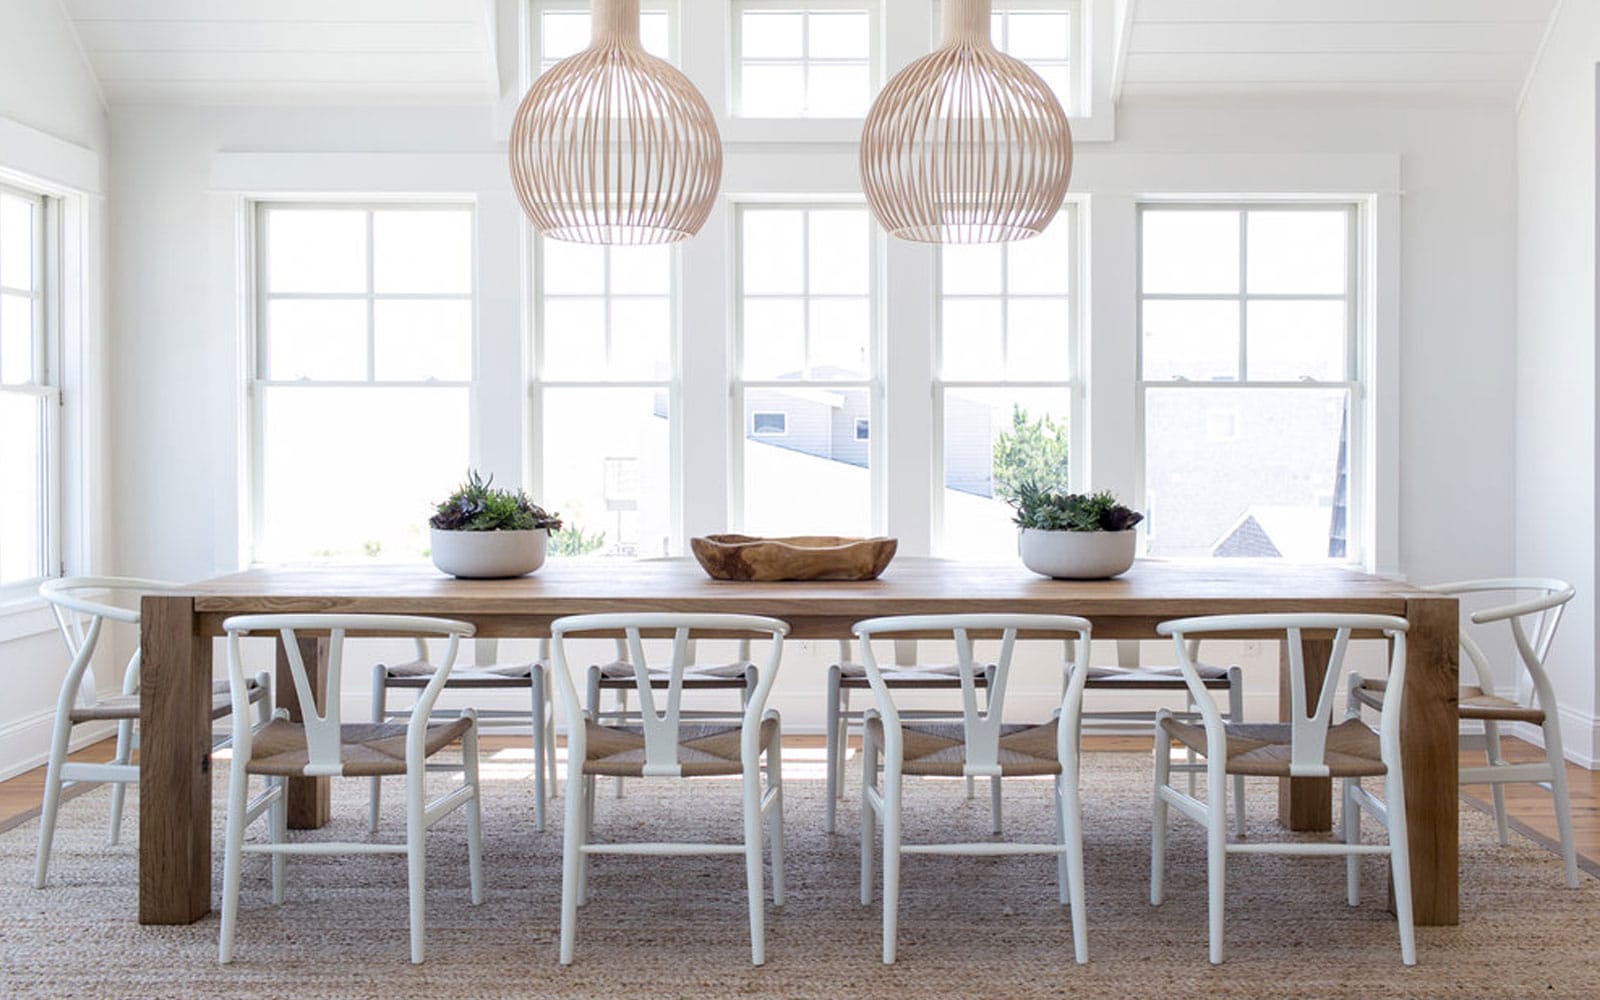 A Scandinavian Farmhouse style Dining space that is simple and modern. See more on The Fresh Exchange.